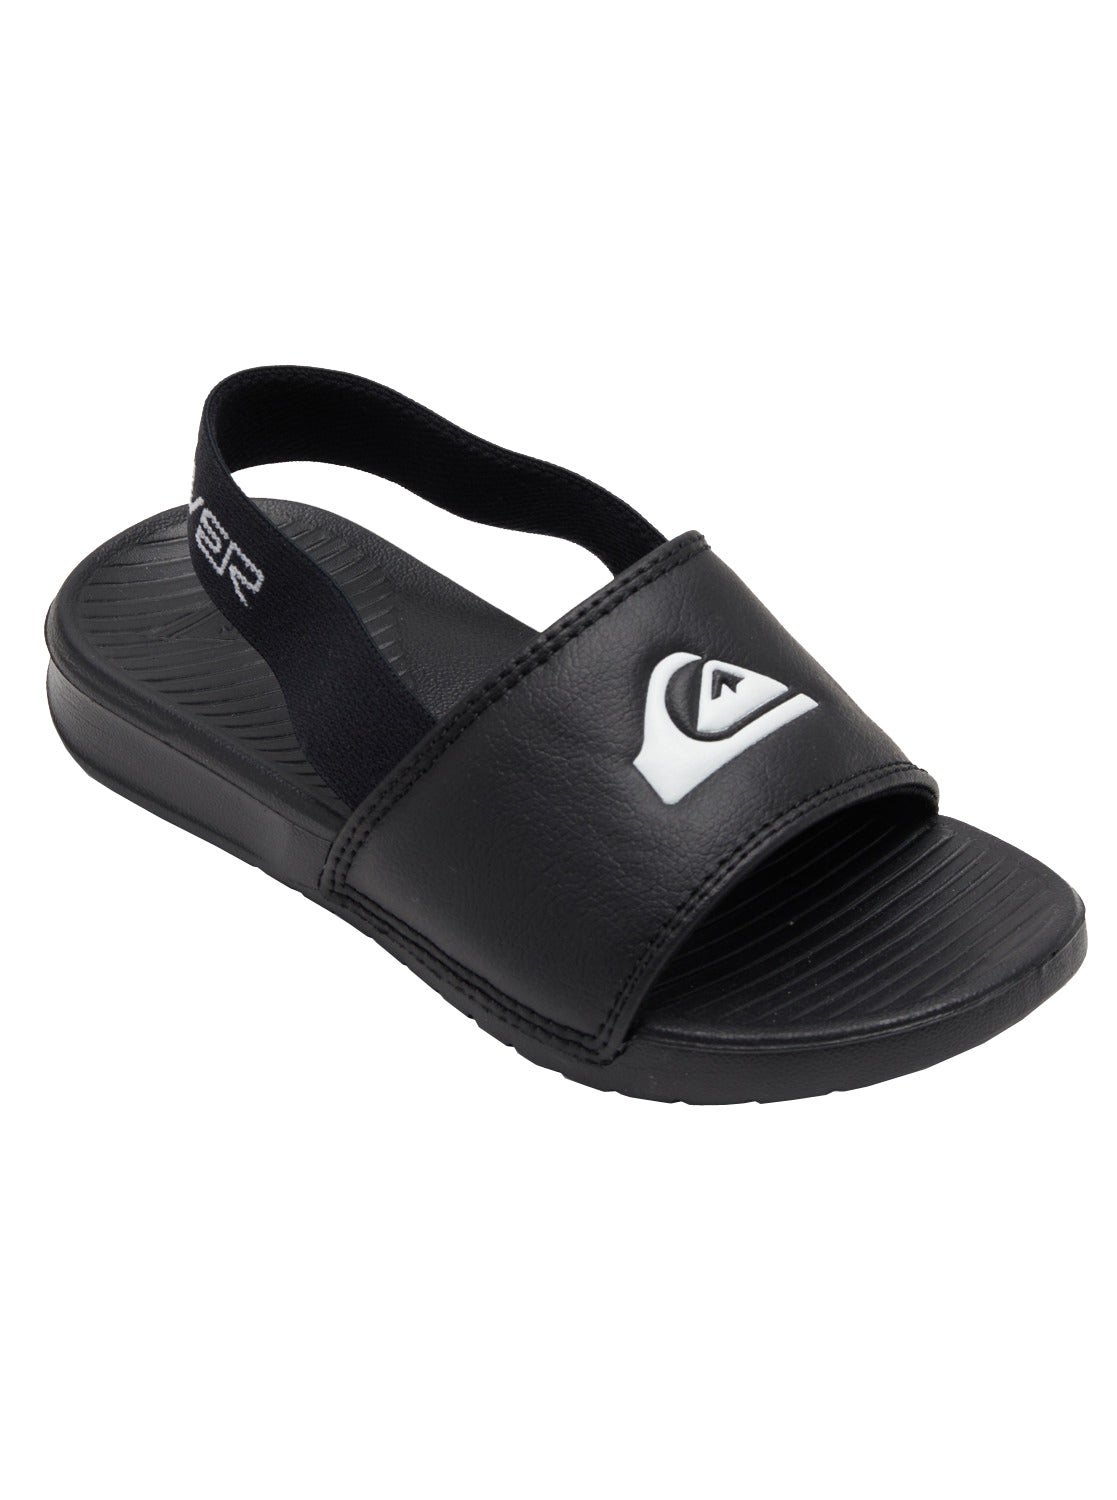 Quiksilver Bright Coast Strapped Toddler Sandal